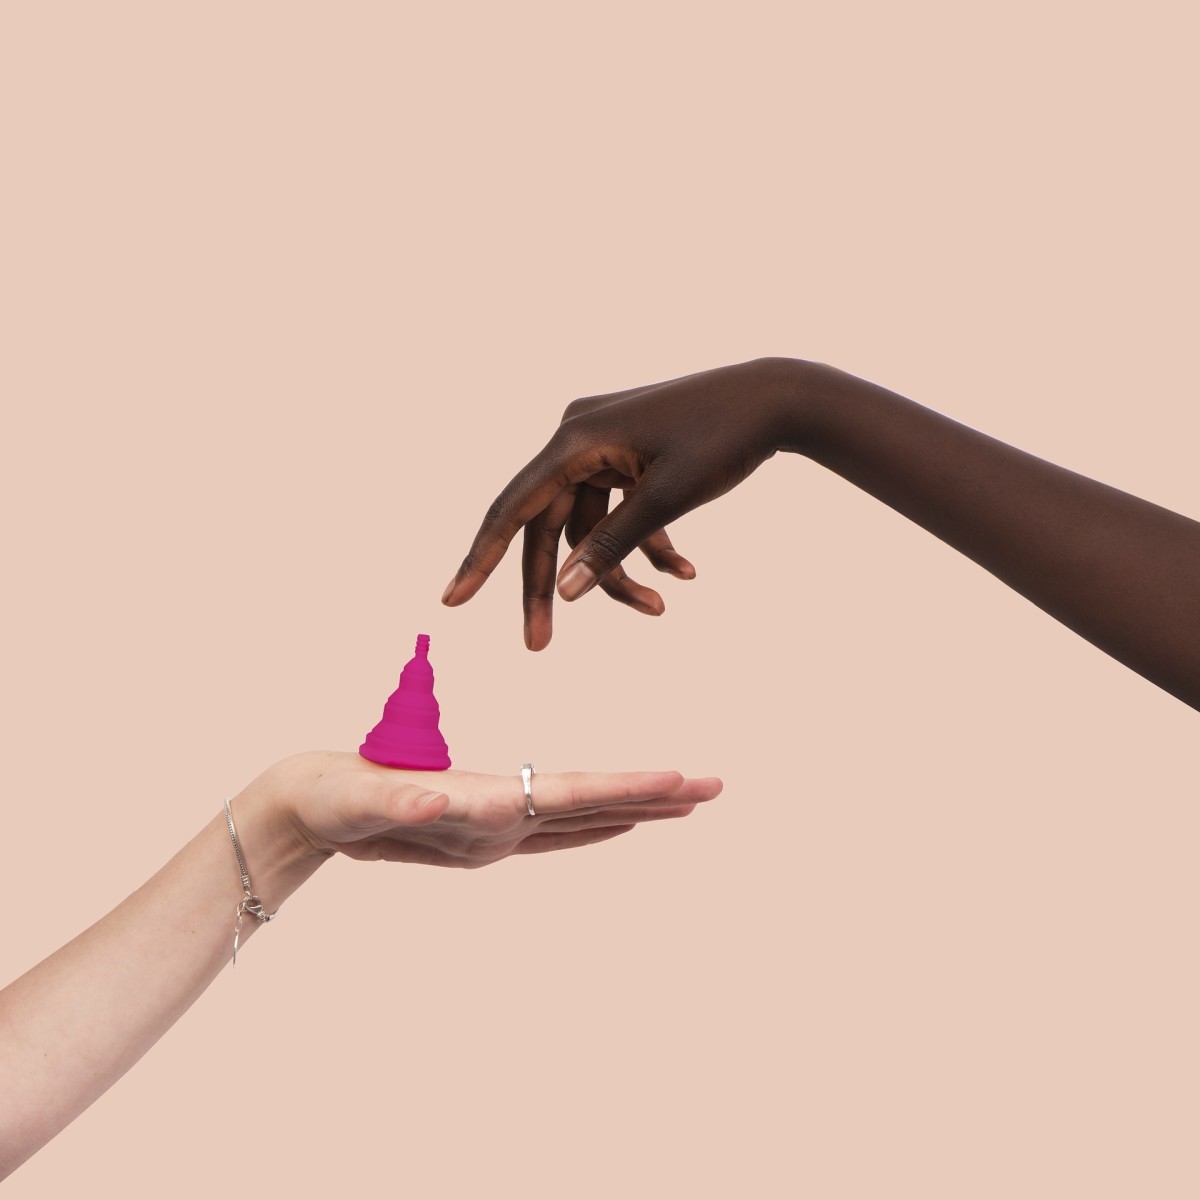 Menstrual Cup Guide for Beginners - What You Need to Know